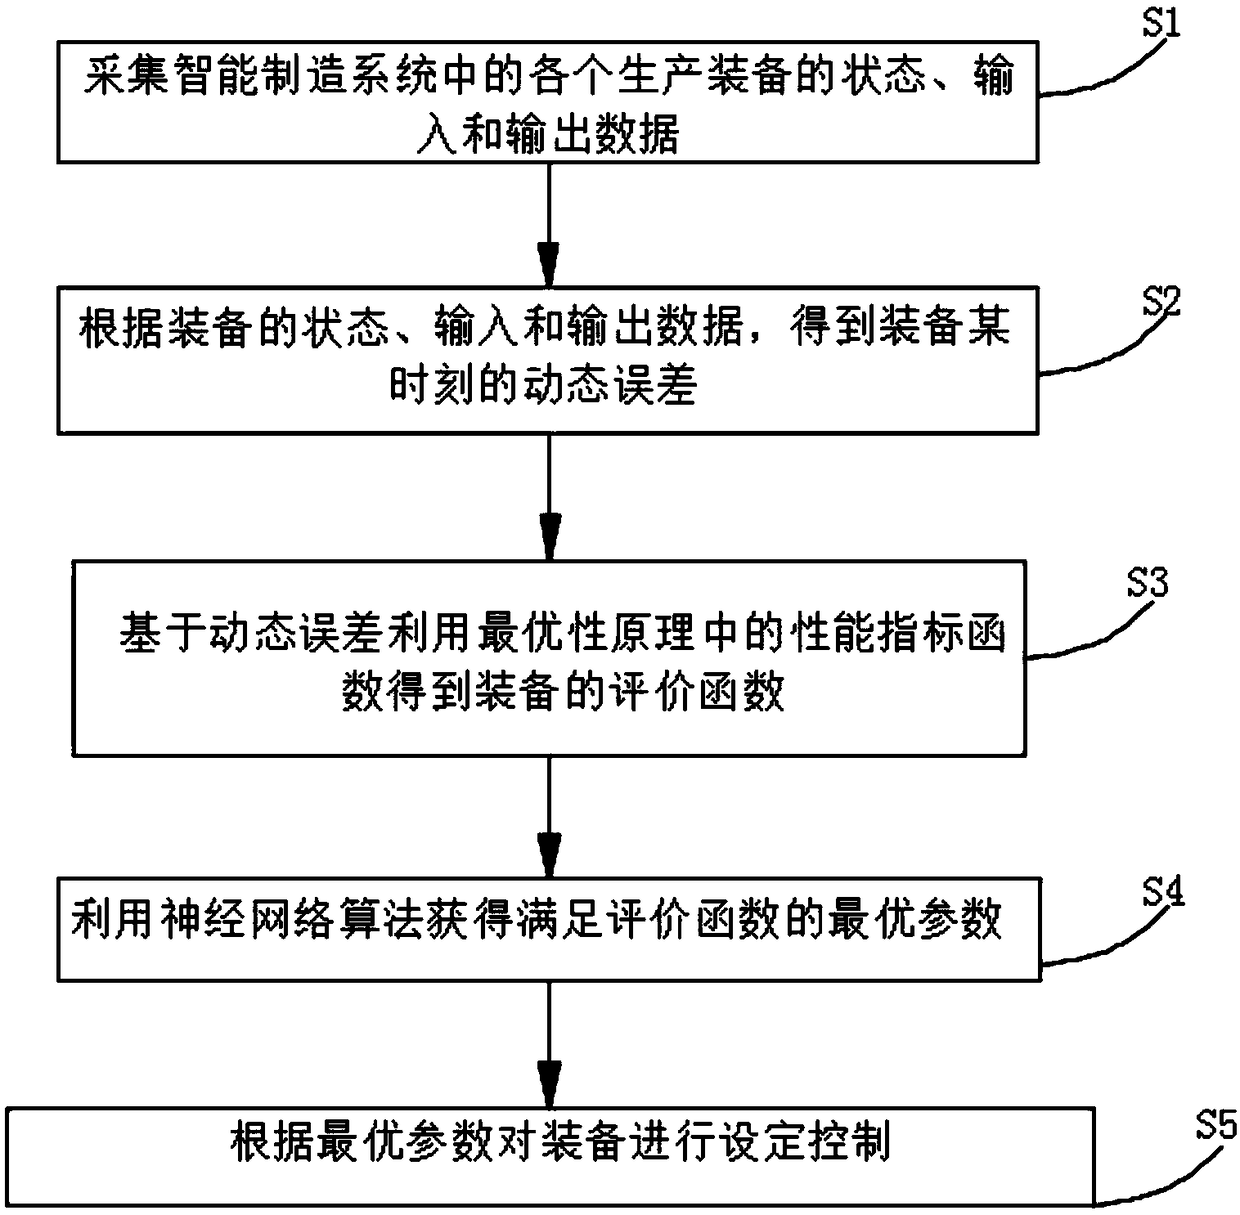 Cooperative control method for intelligent manufacturing system